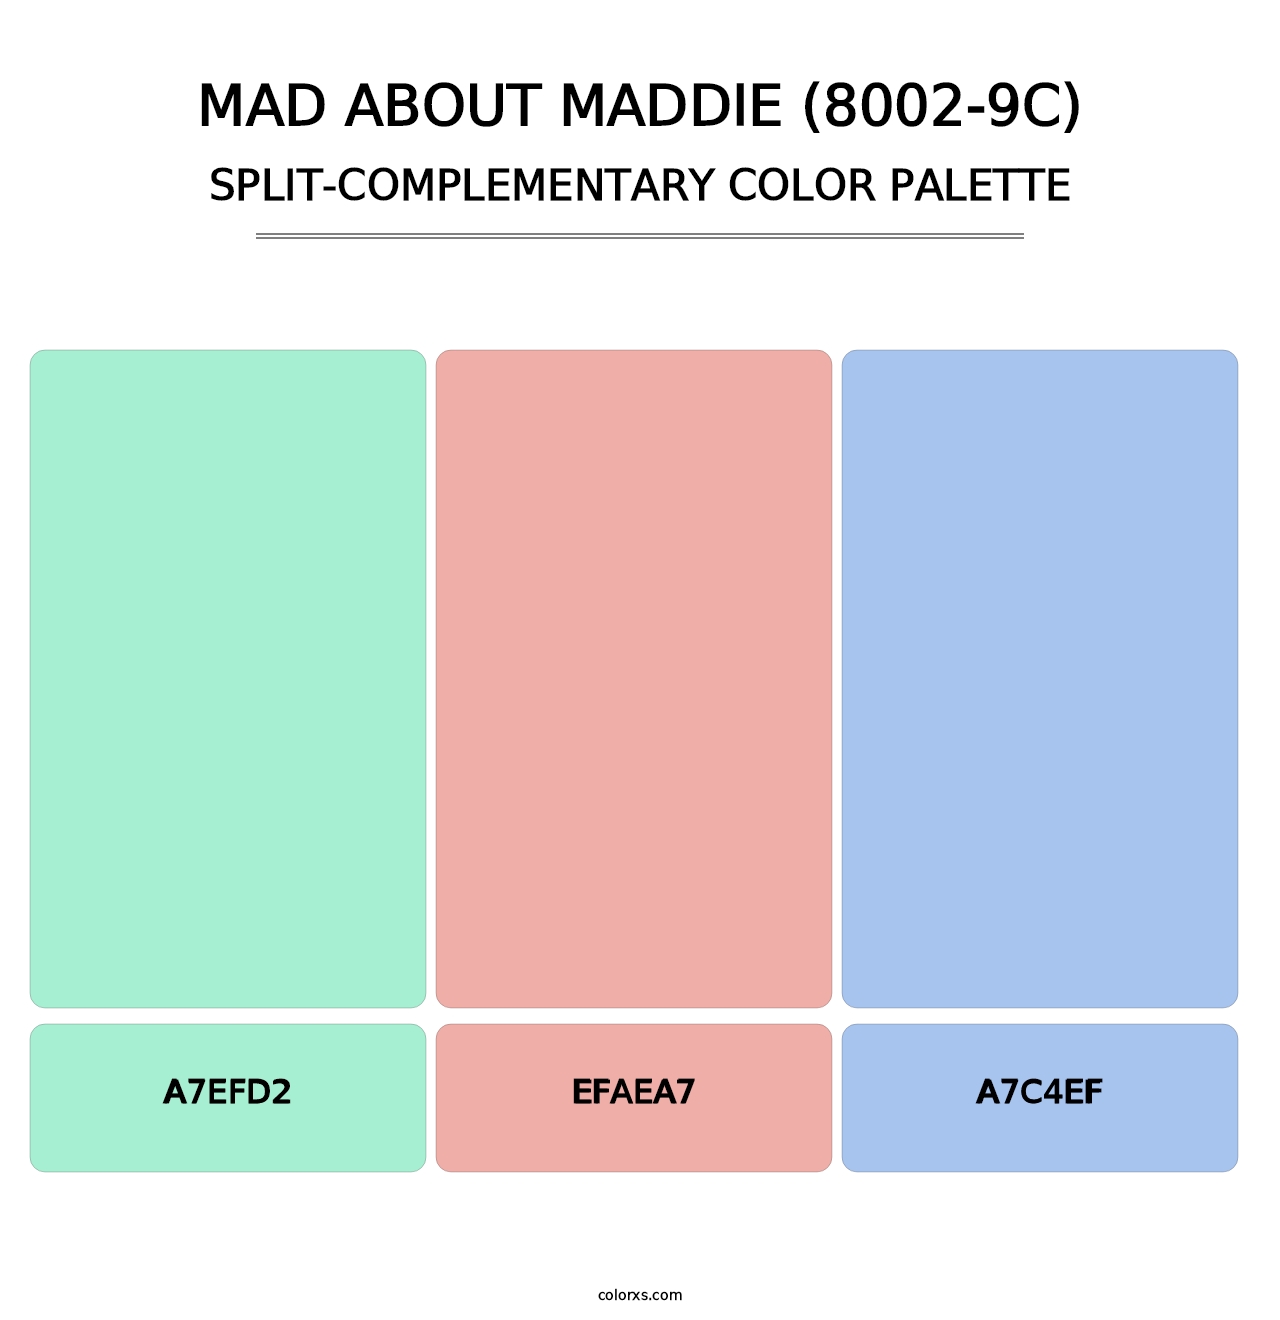 Mad About Maddie (8002-9C) - Split-Complementary Color Palette